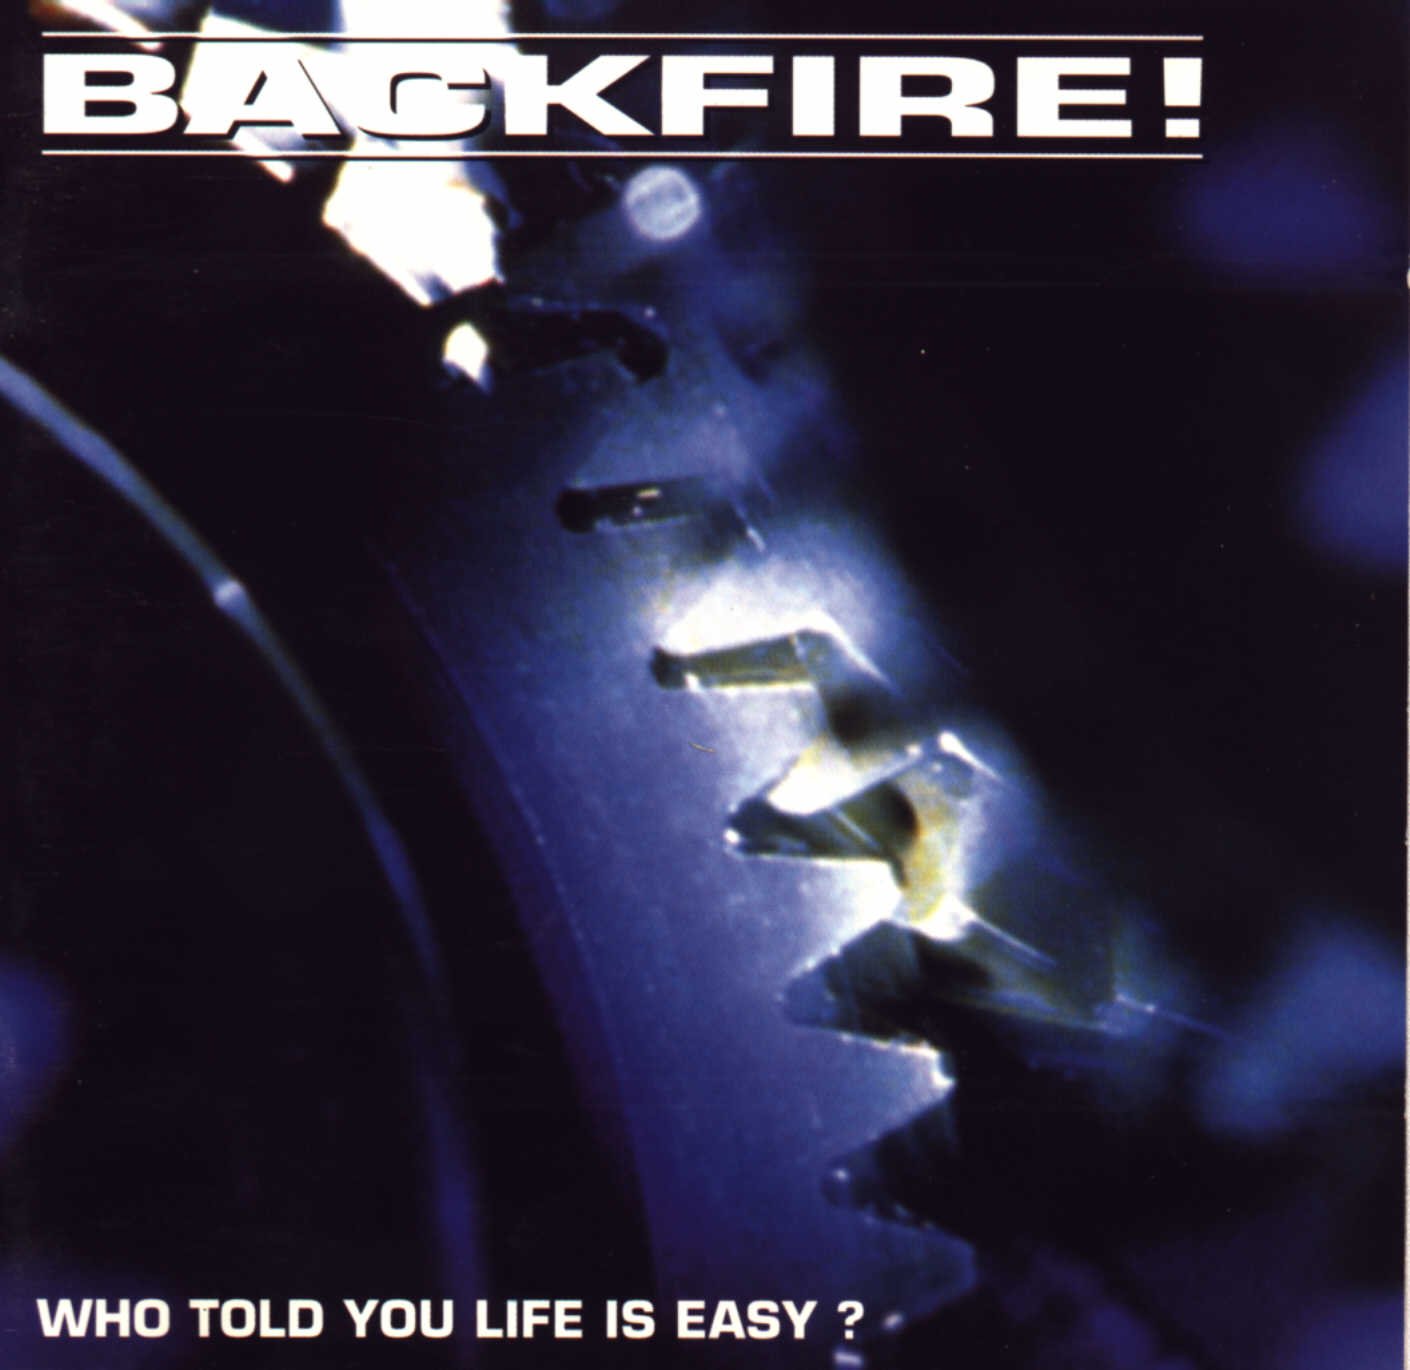 Backfire-Who Told You Life Is Easy-16BIT-WEB-FLAC-1995-VEXED